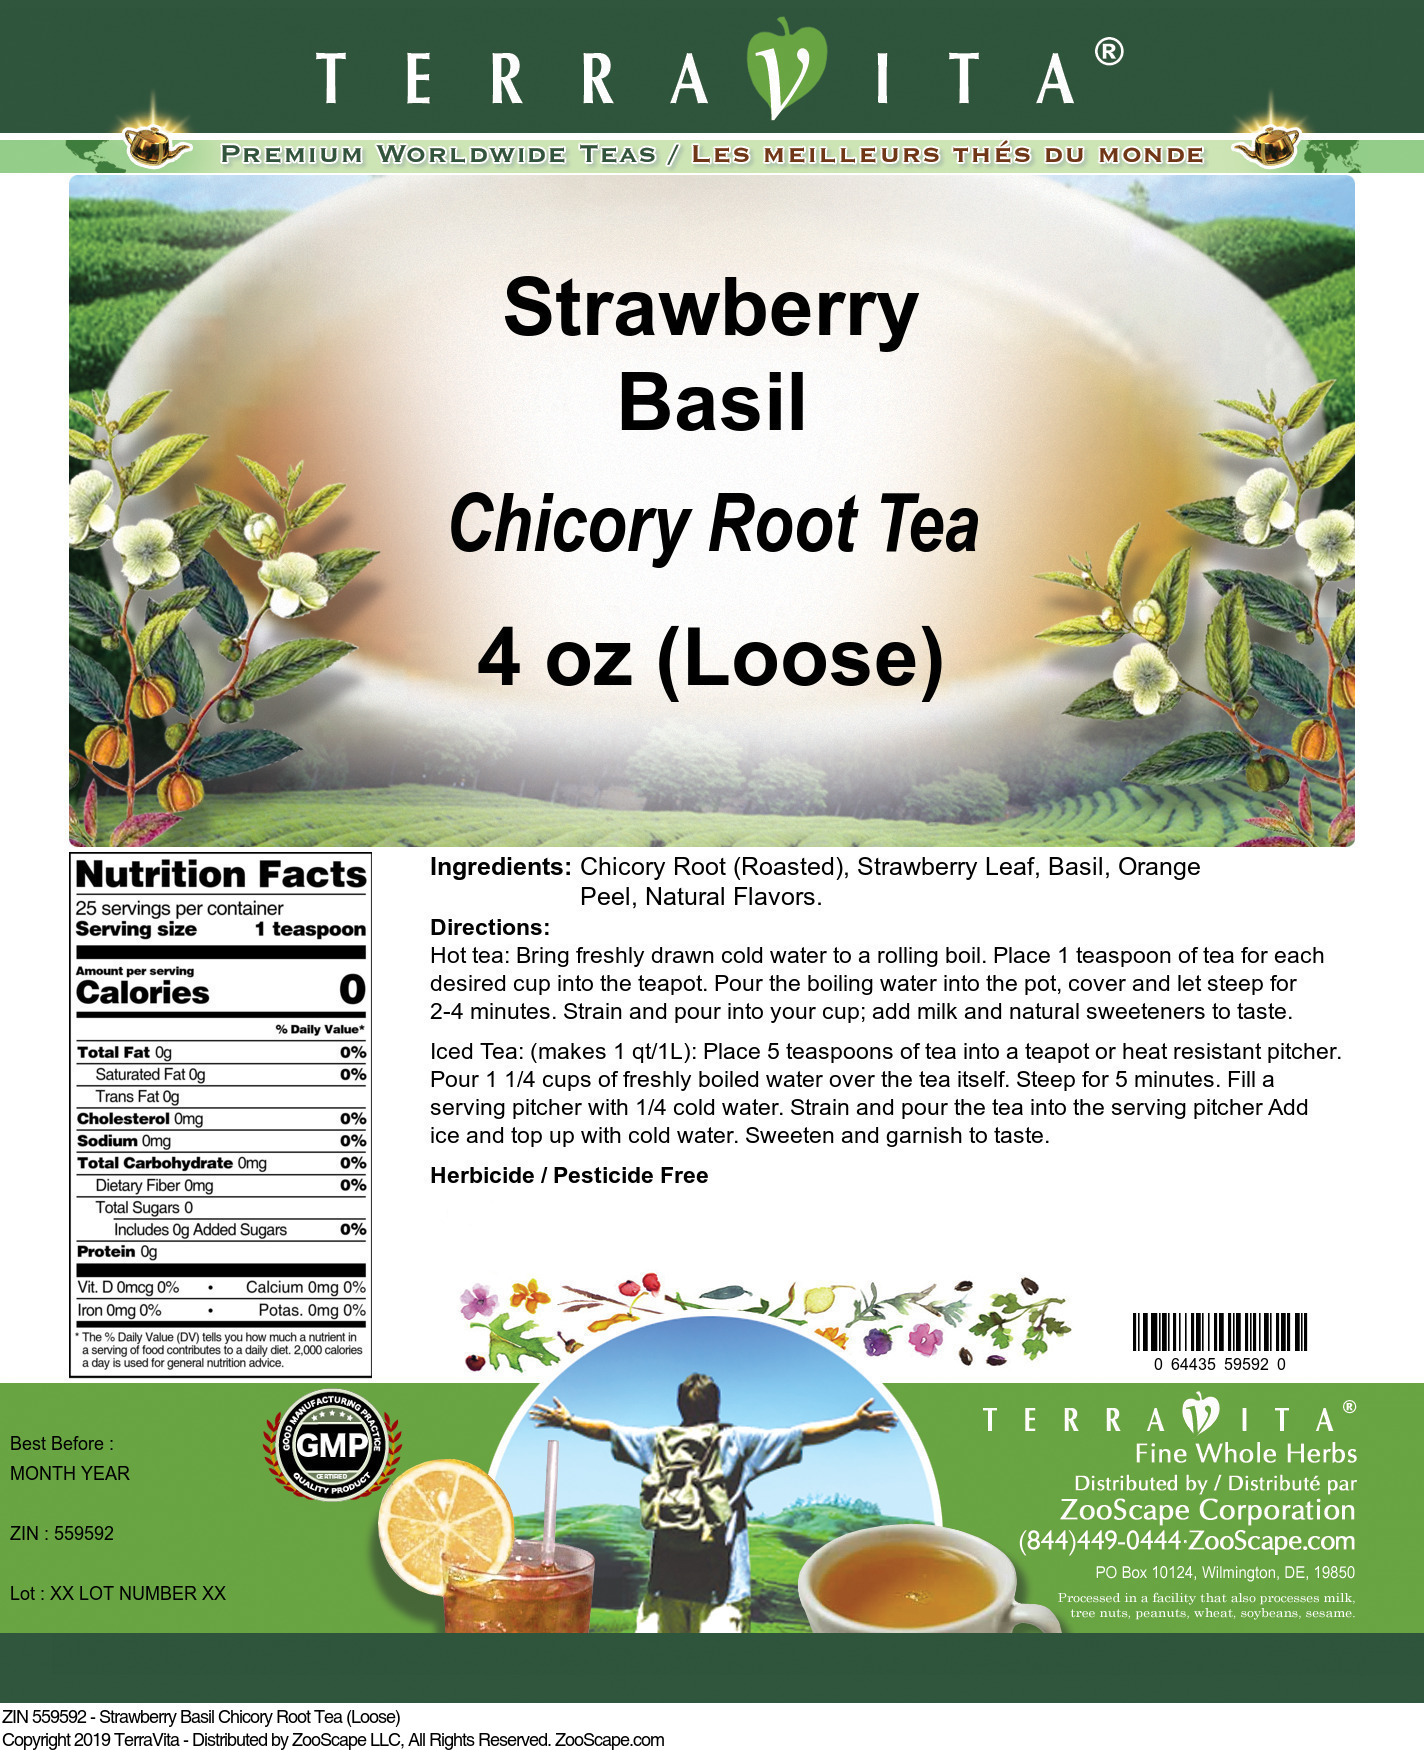 Strawberry Basil Chicory Root Tea (Loose) - Label